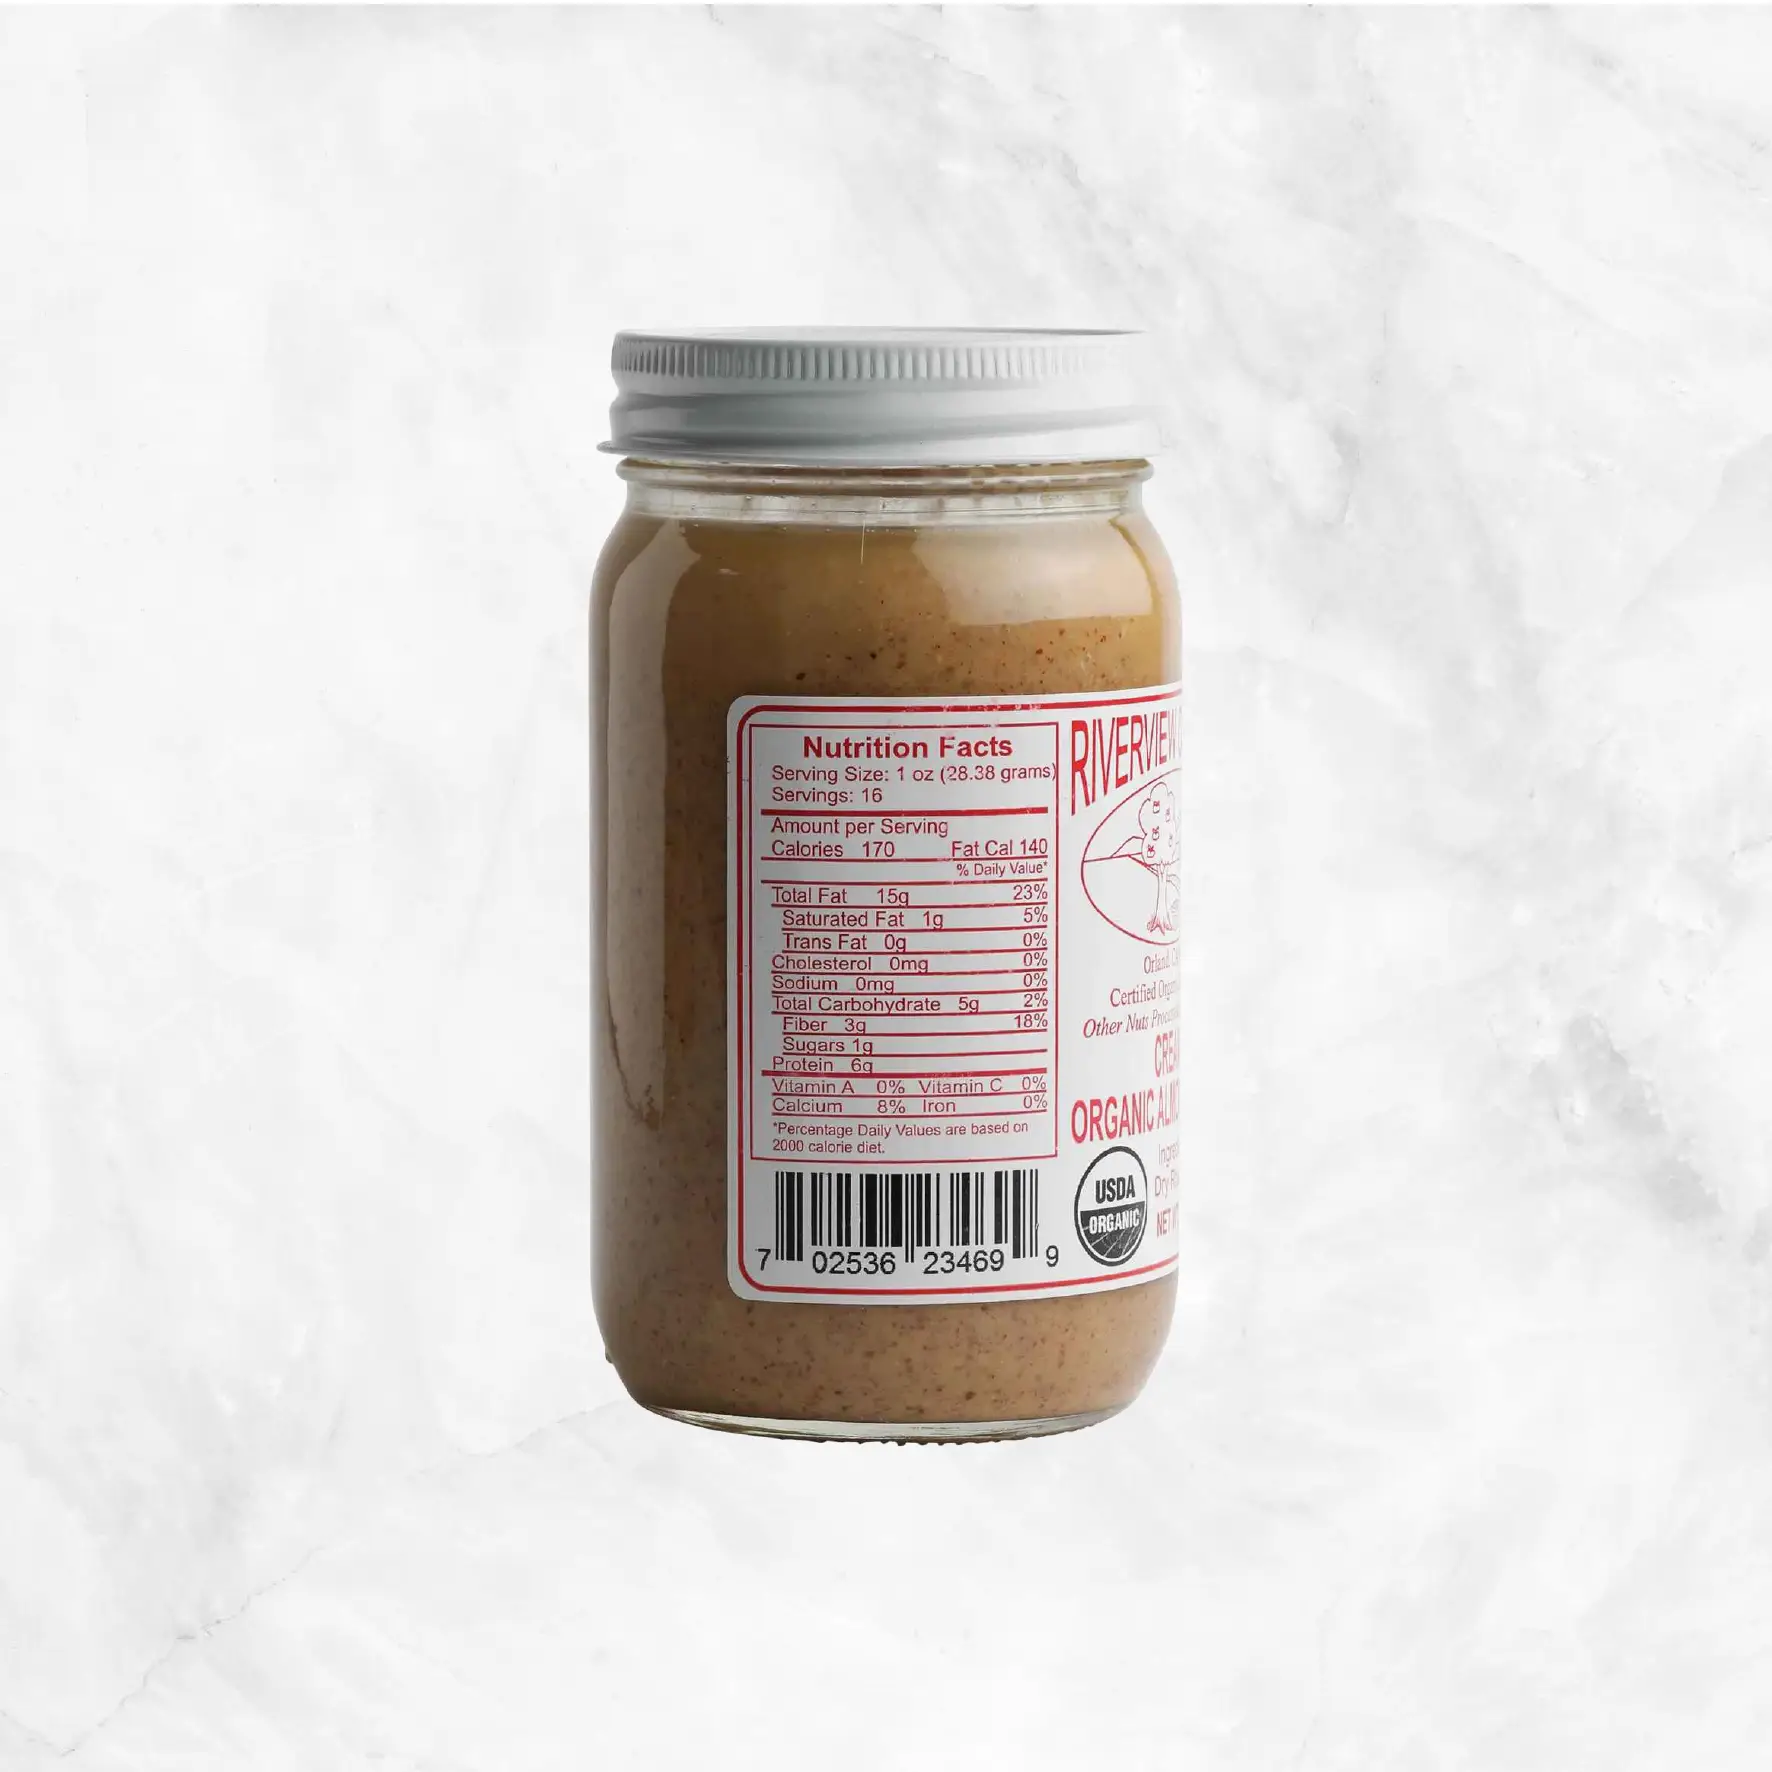 Creamy Almond Butter Delivery